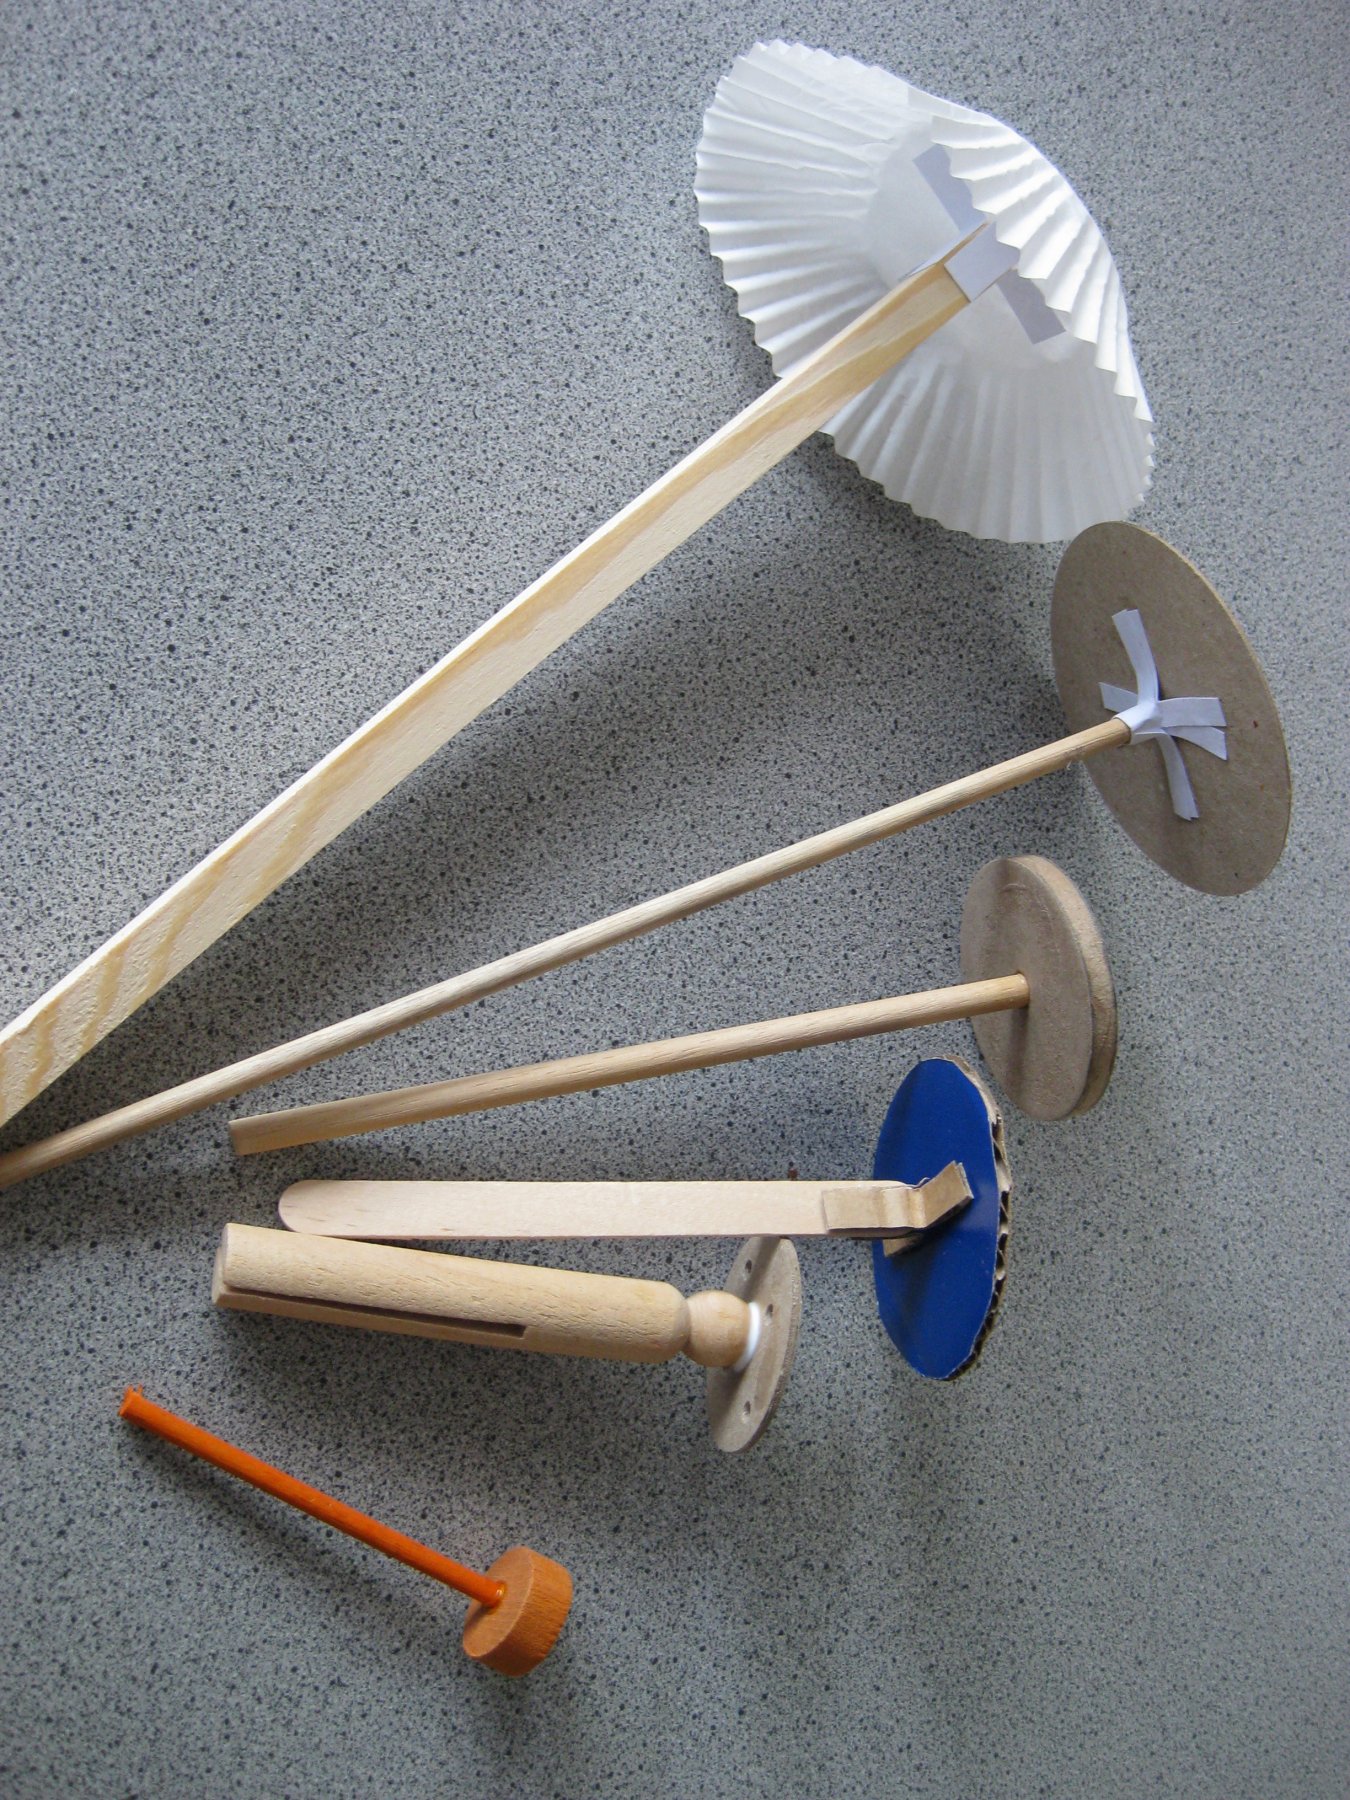 examples of finished sticks